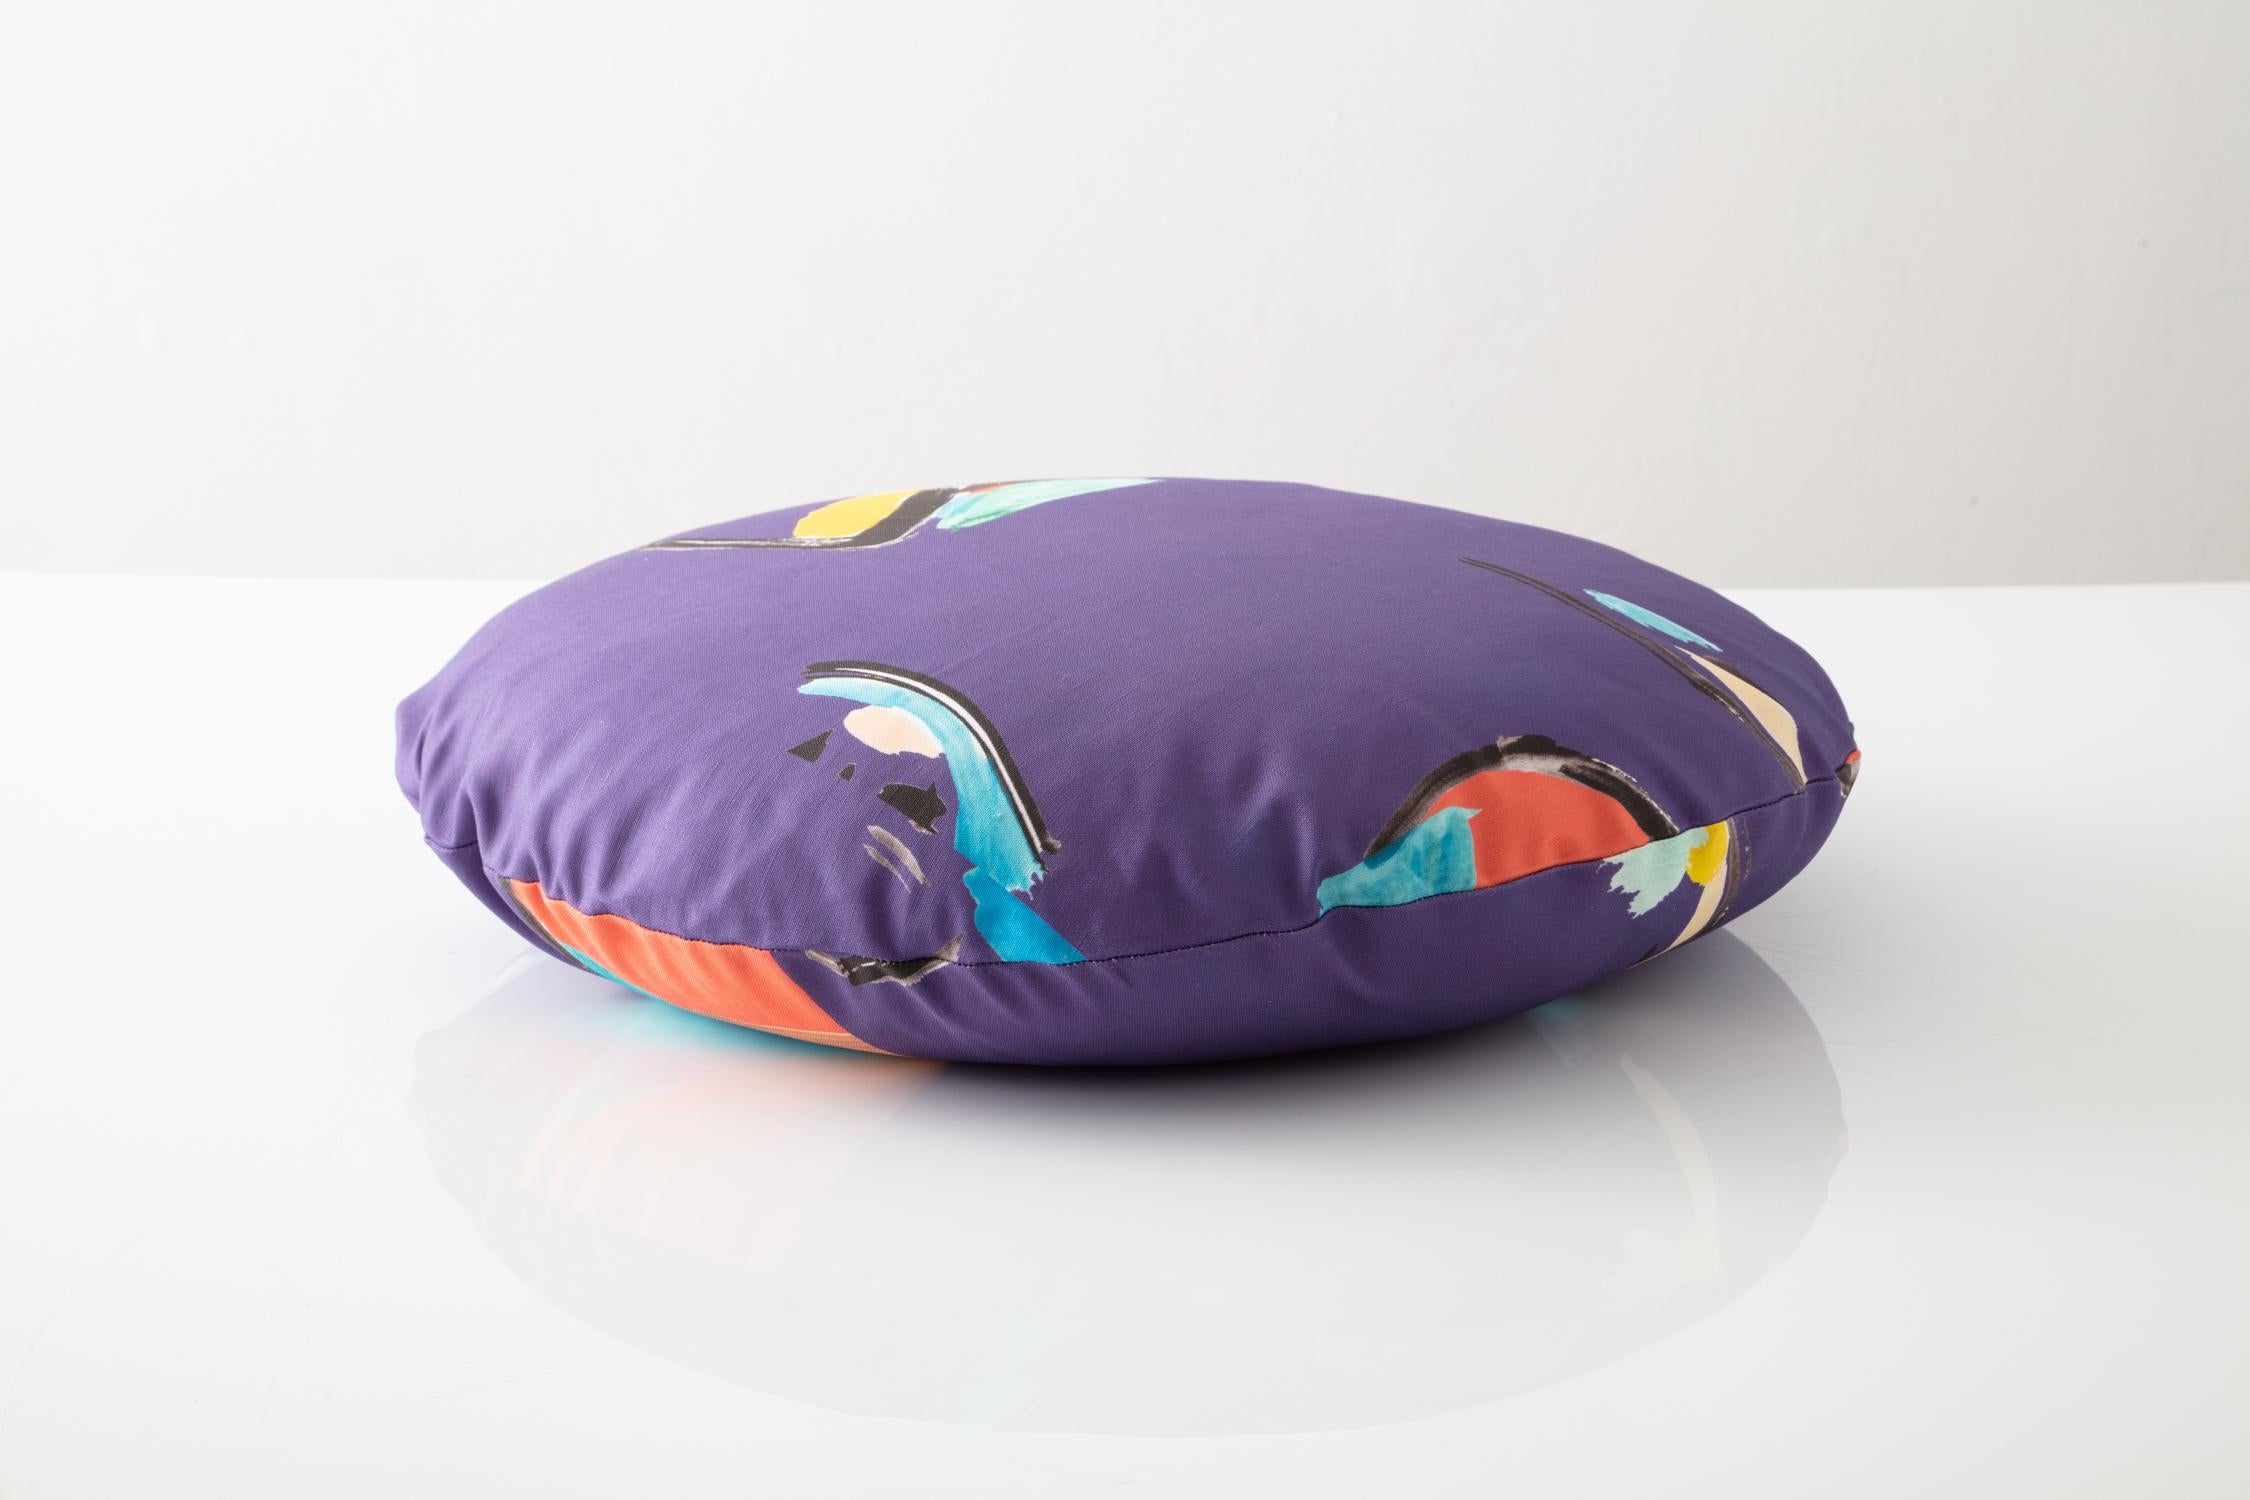 Other Circle Purple Pod Pillow For Sale